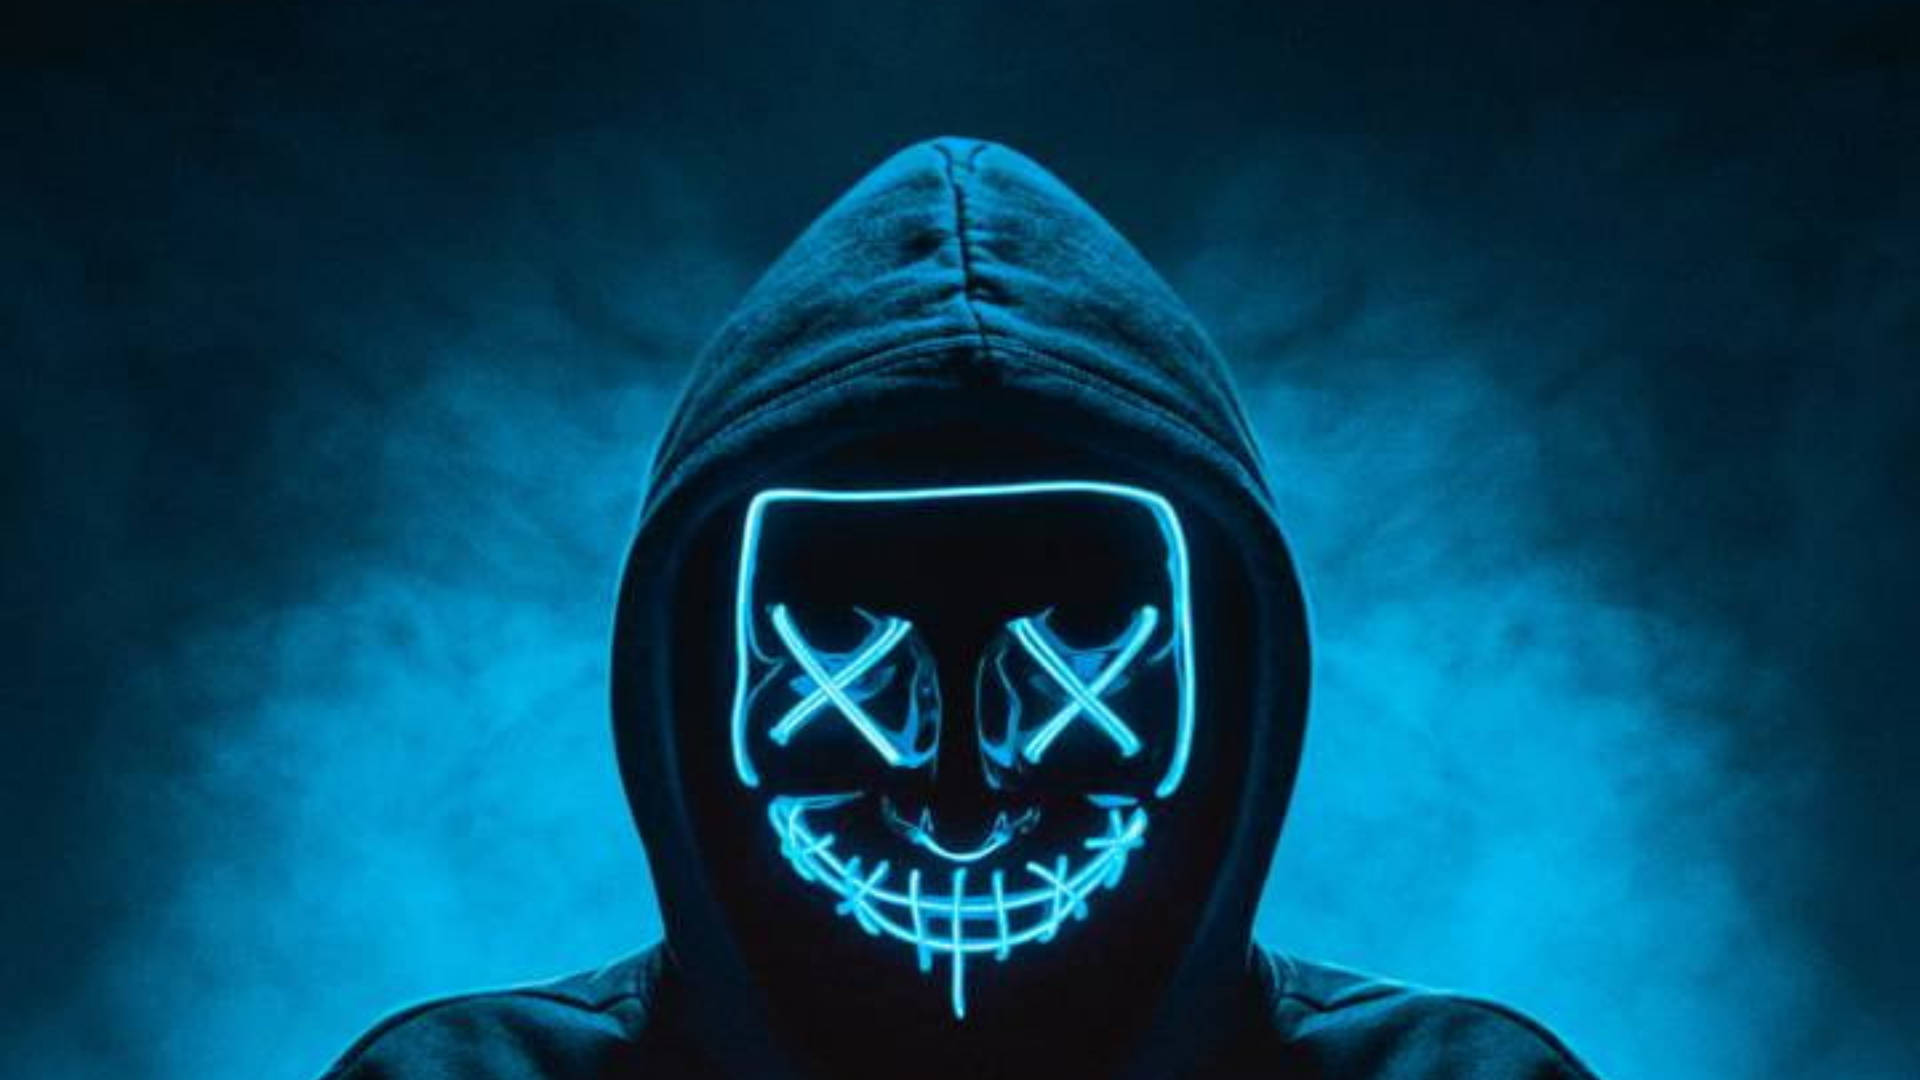 Neon Mask And Hoodie Hacker 4k Background